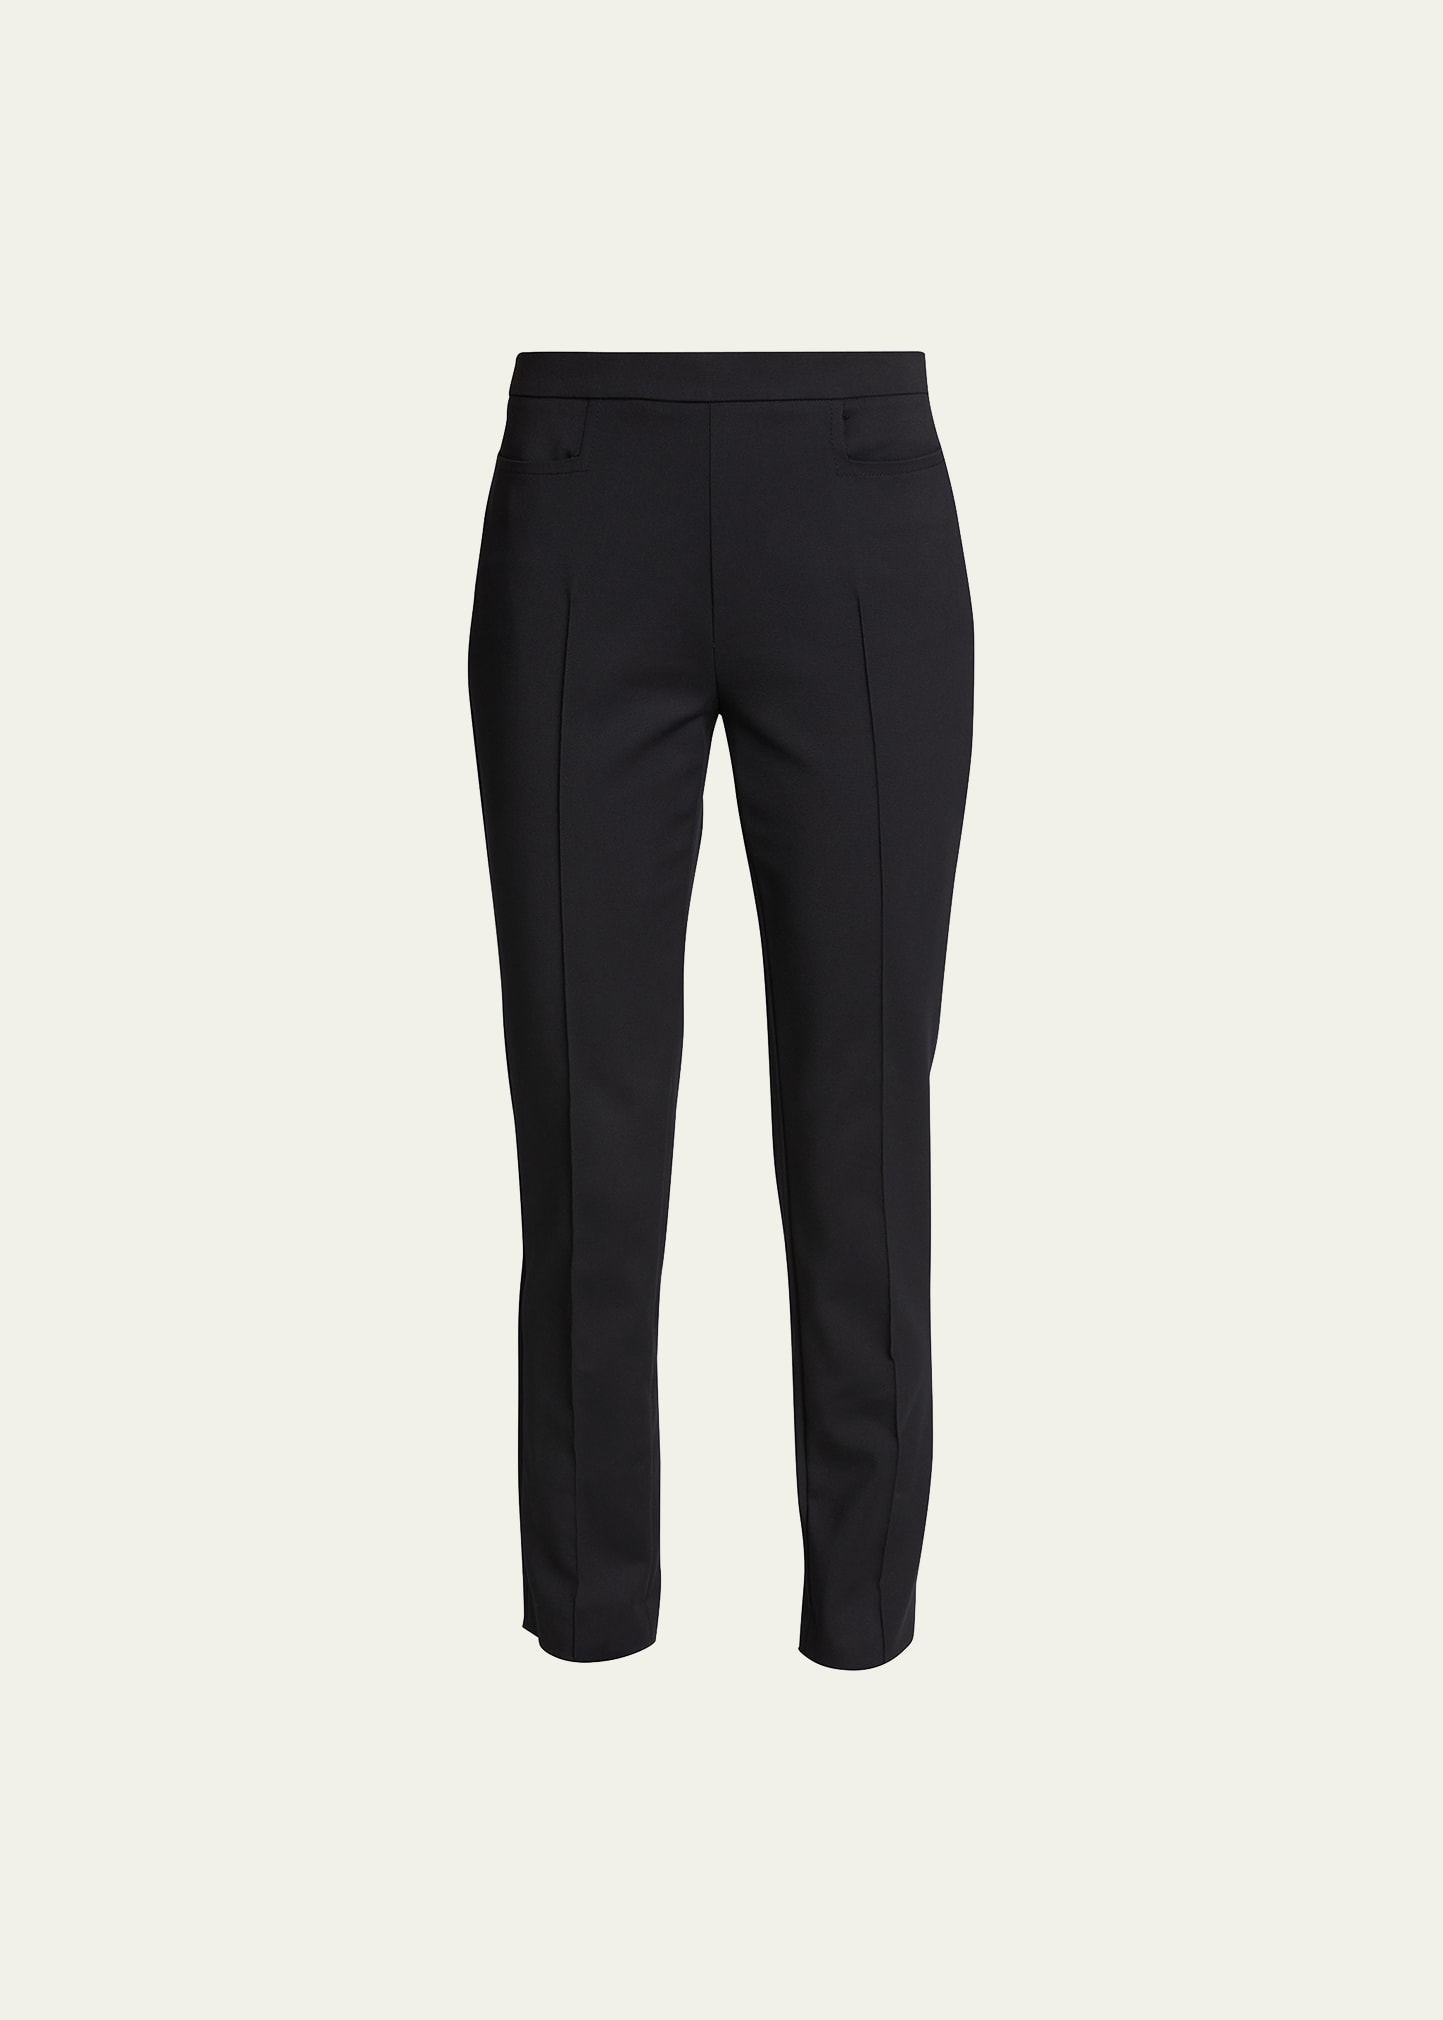 Franca Mid-Rise Cropped Pants